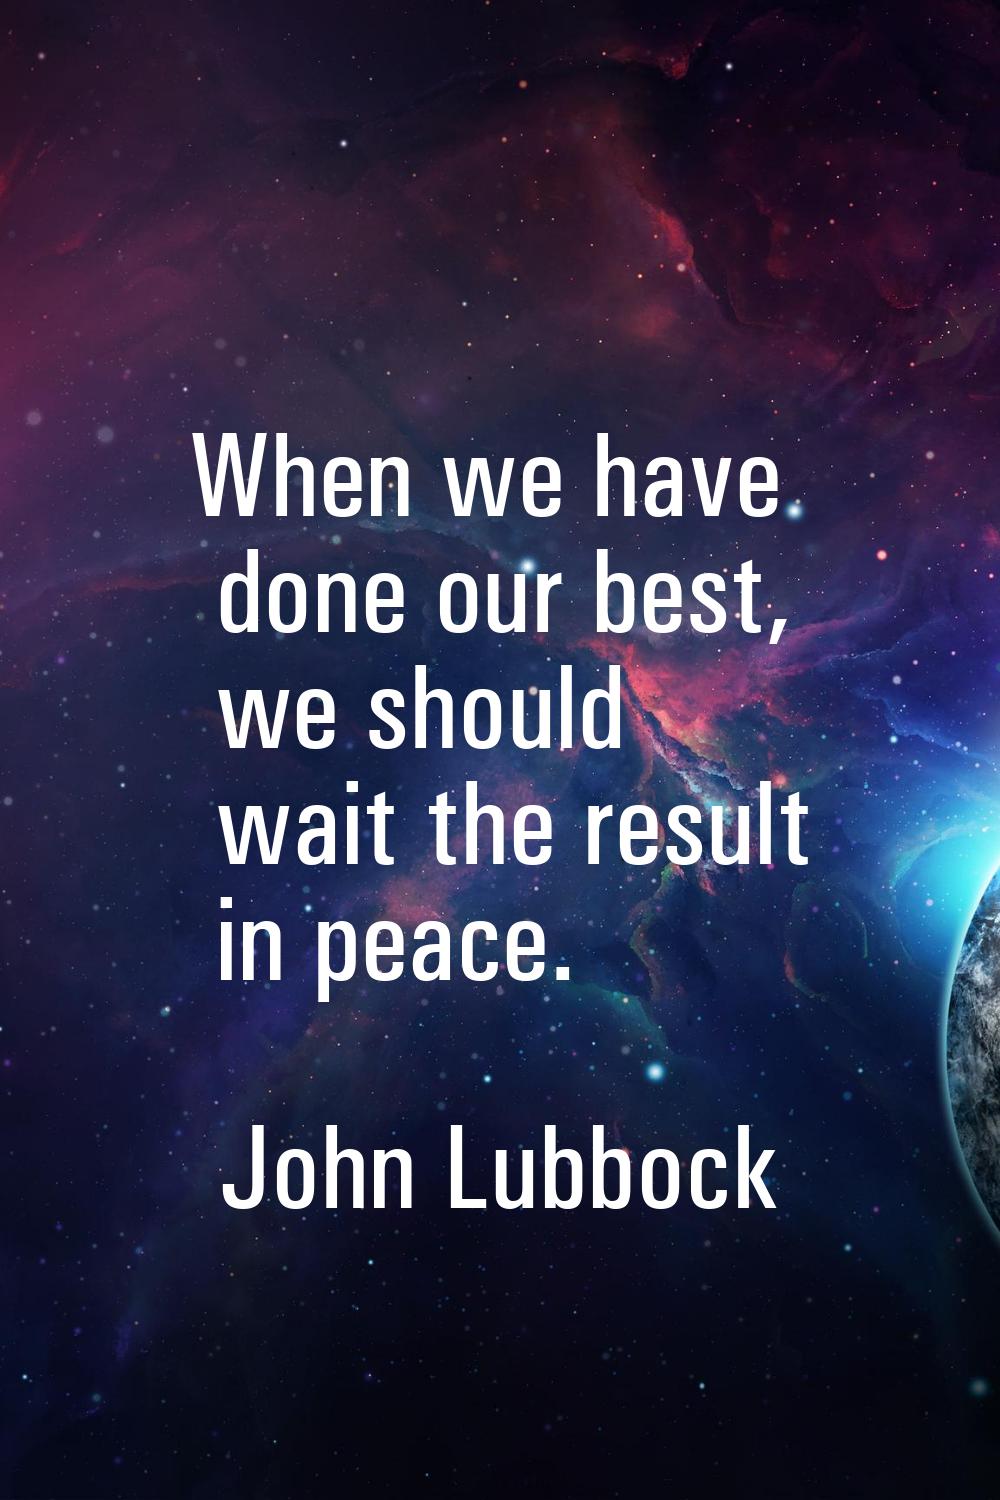 When we have done our best, we should wait the result in peace.